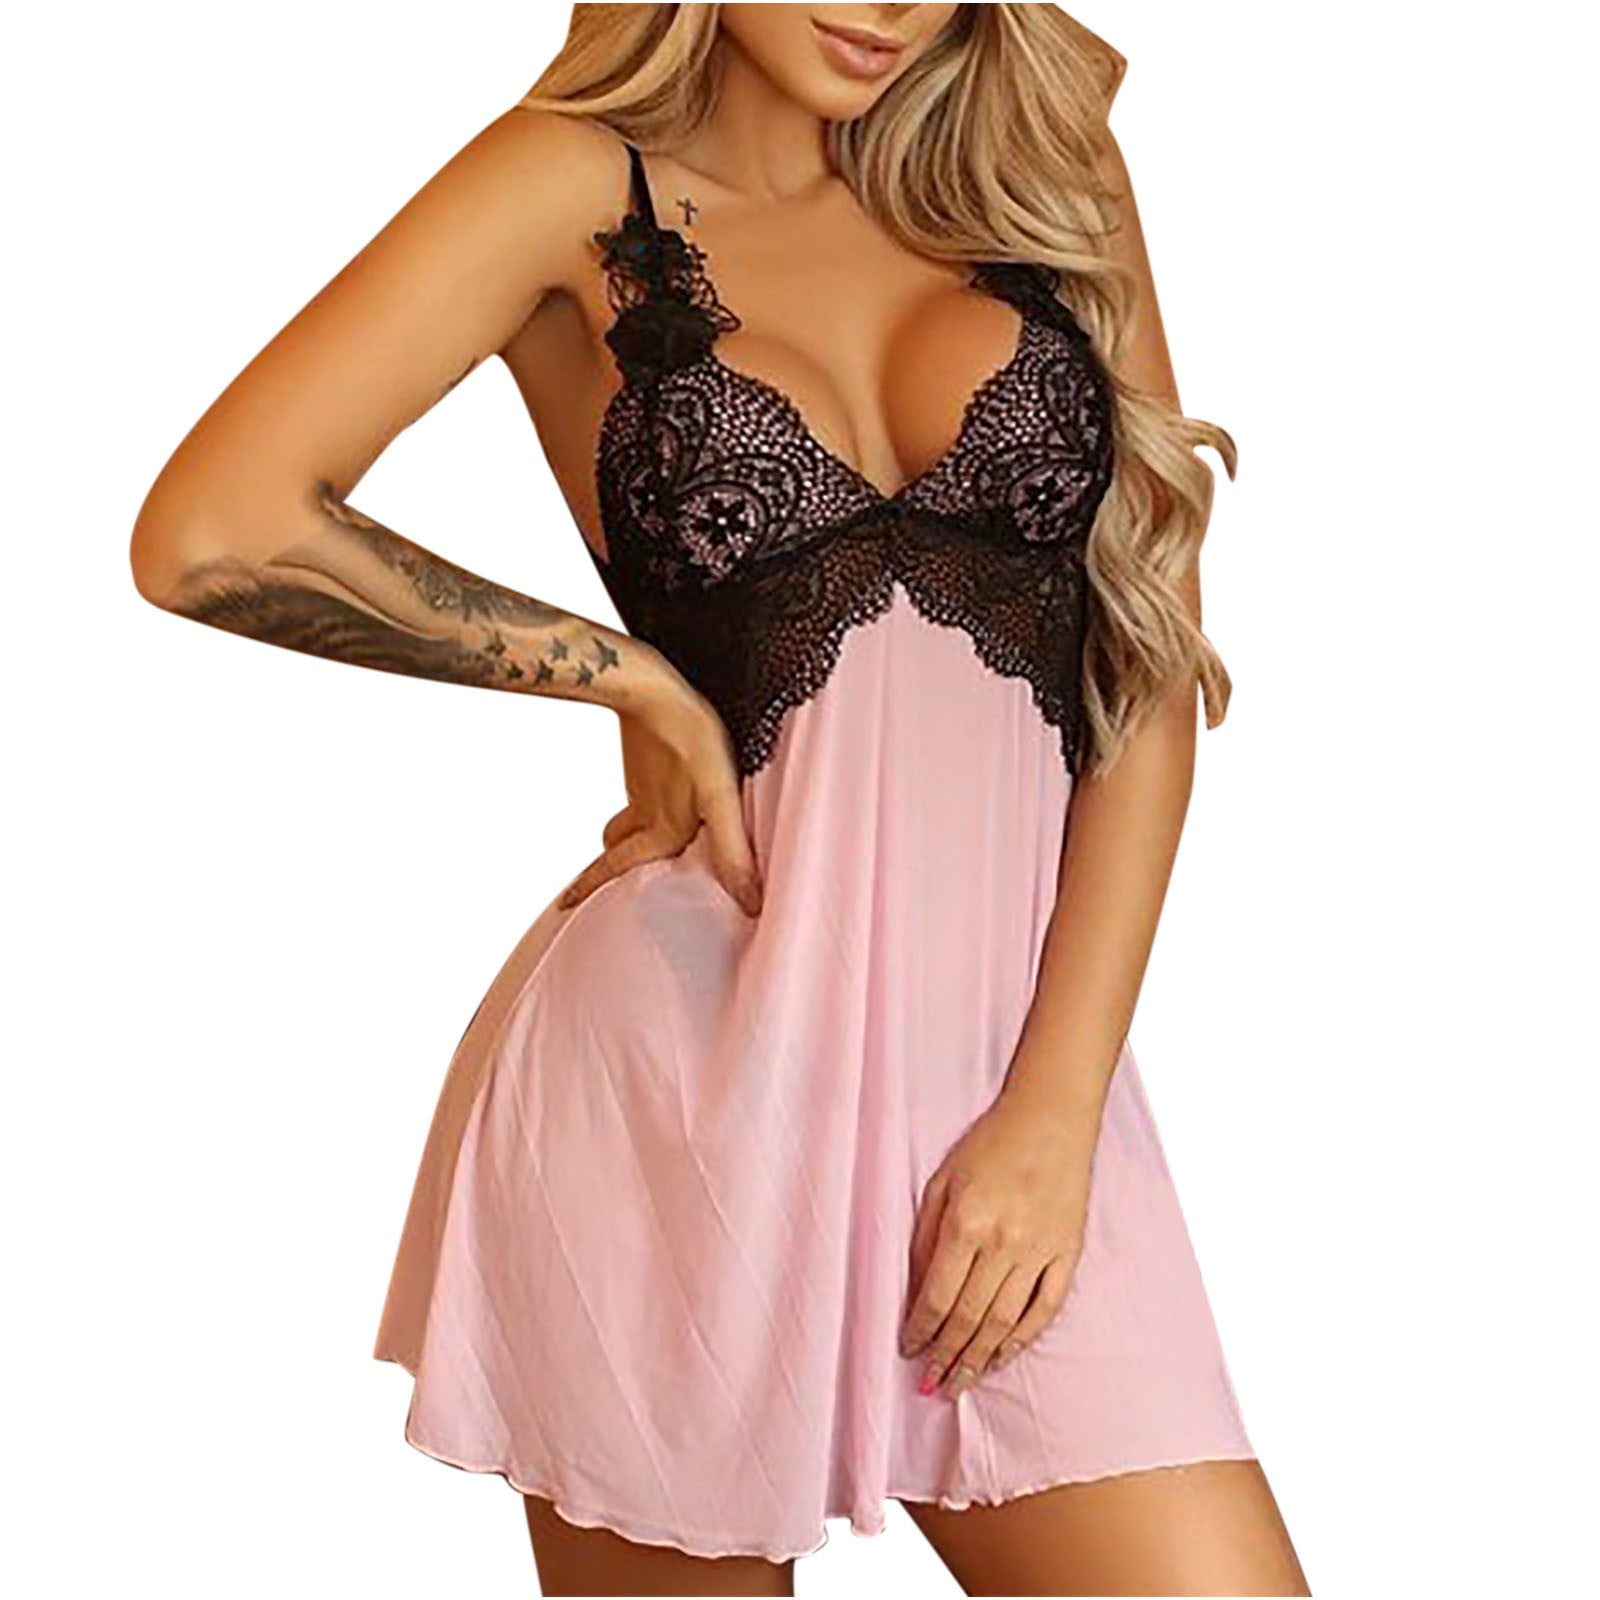 REORIAFEE Fashion Sexy Women Lingerie Underwear Sexy Lingerie Women Sex Naughty Honeymoon Sexy Lingerie Sling Suspender Skirt Sexy Lace Net Yarn Bow Sexy Nightdress Pink L